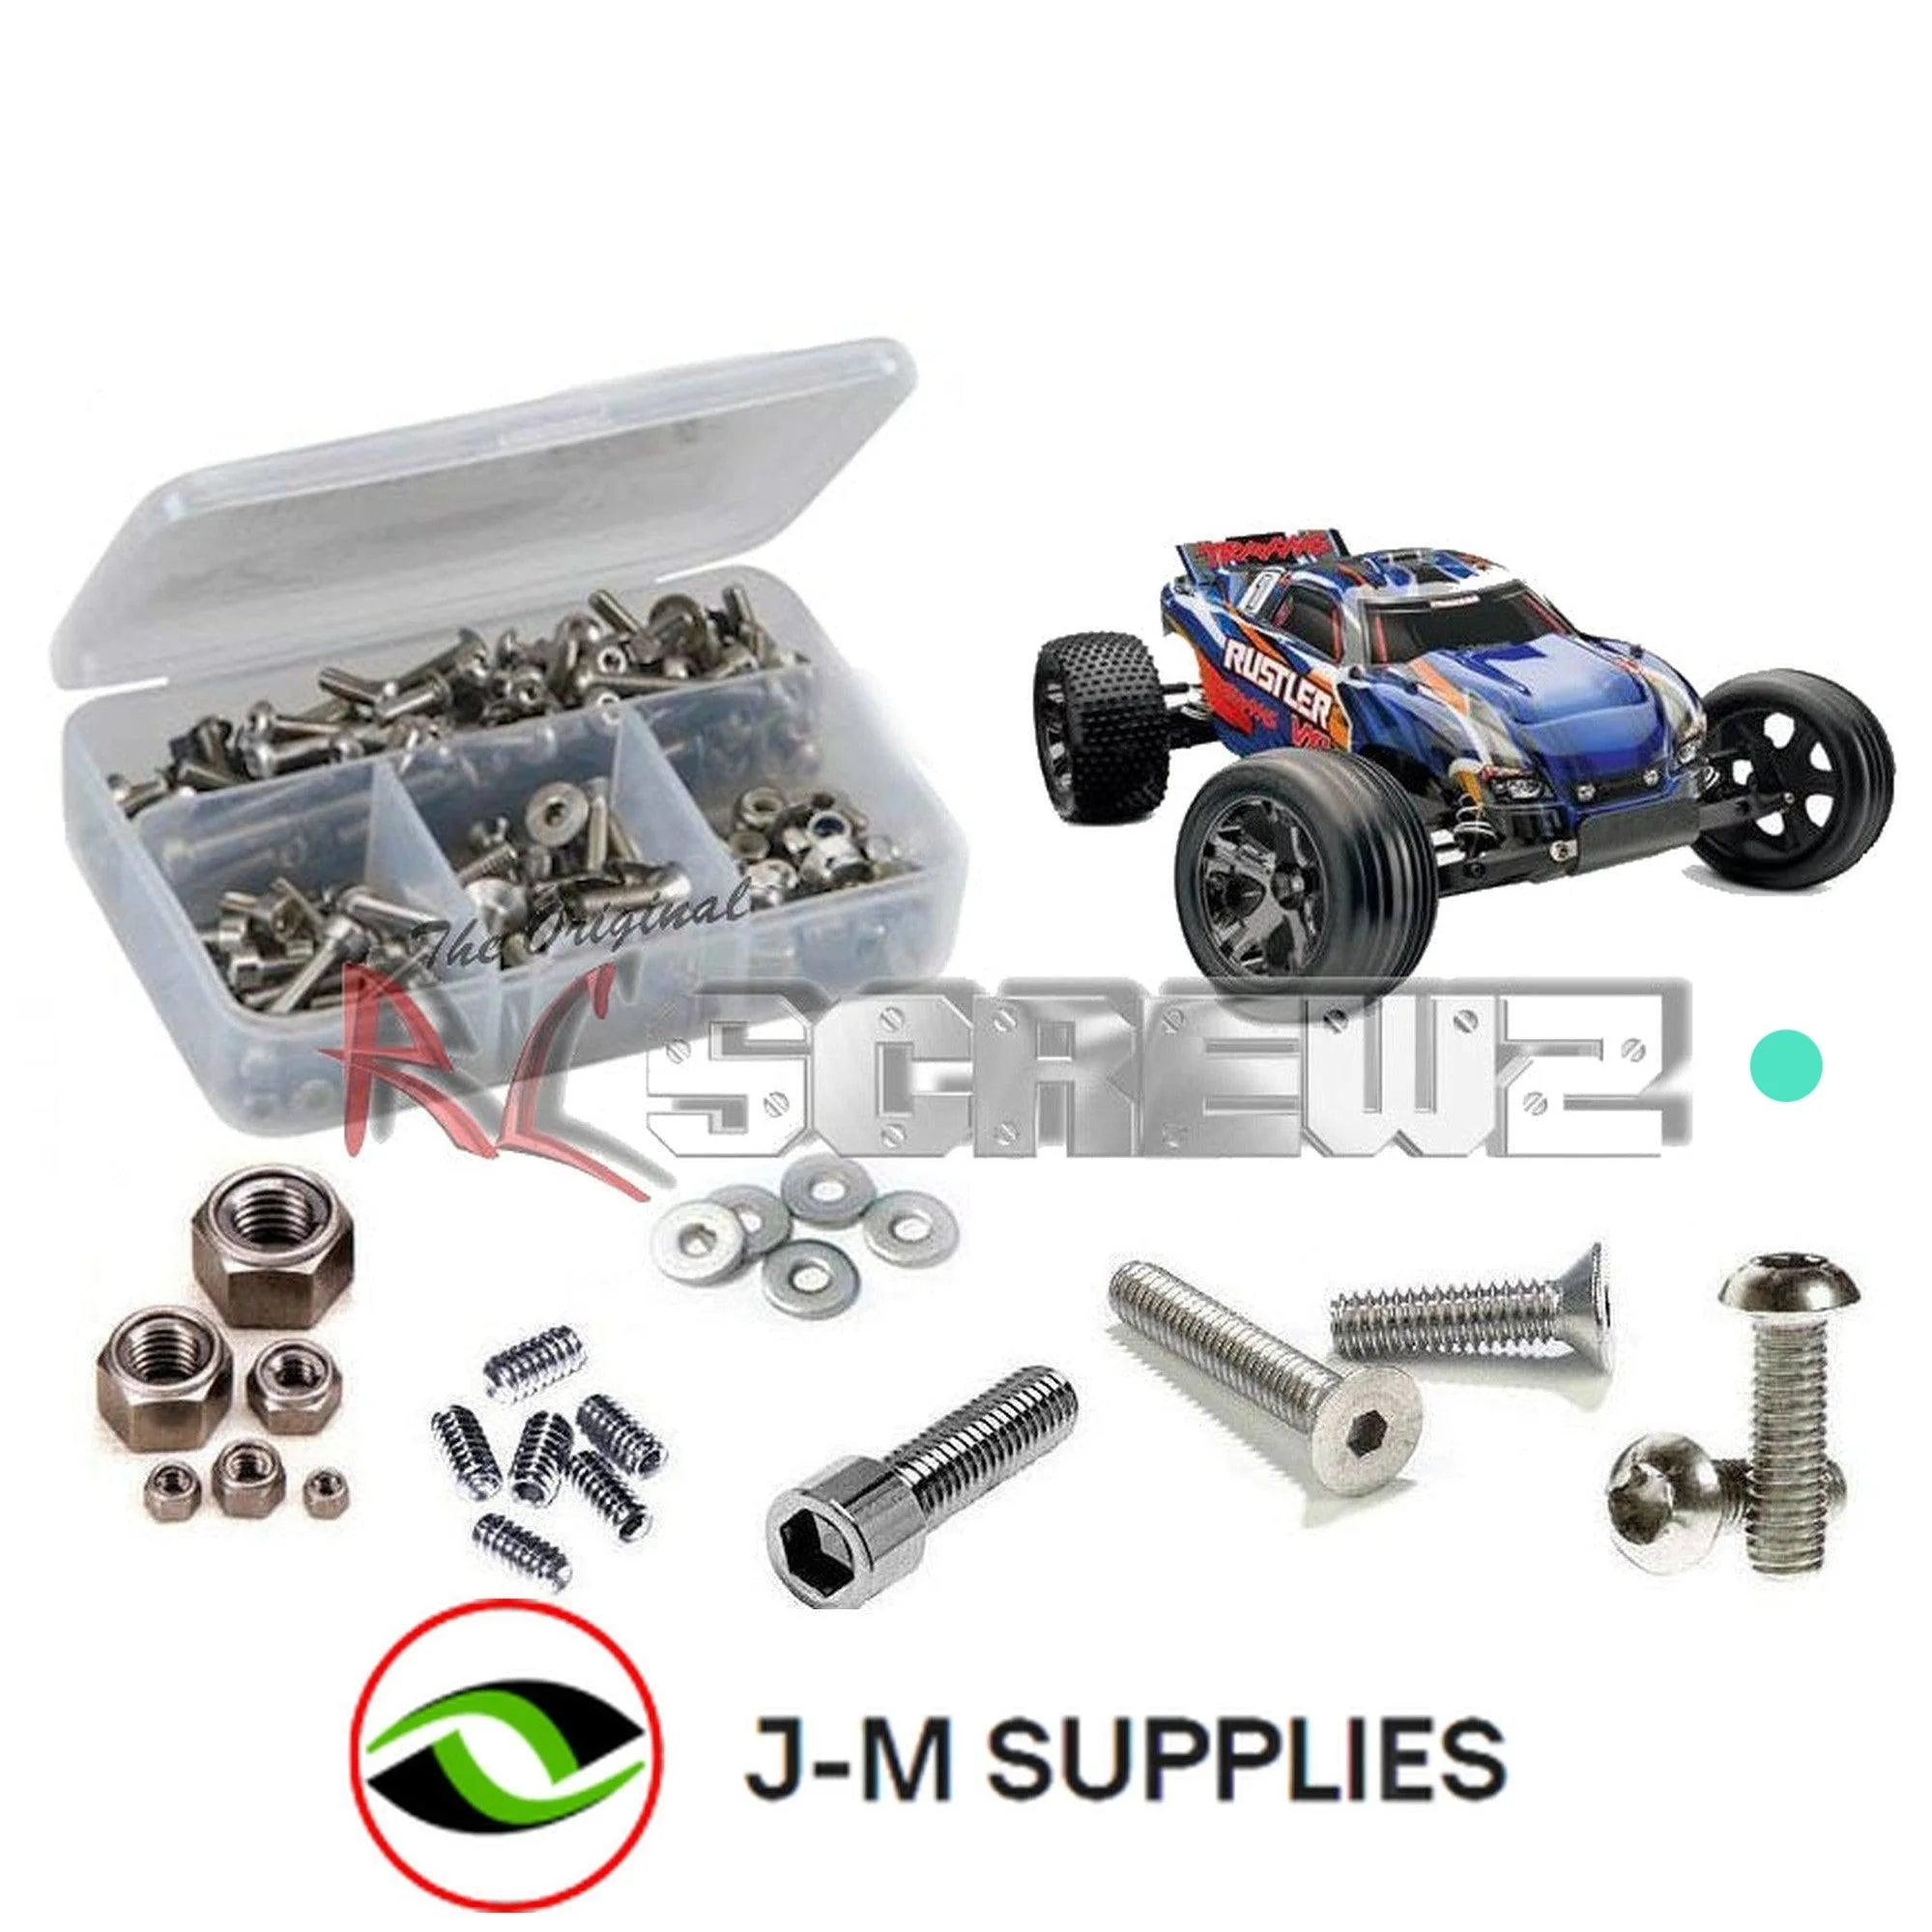 RCScrewZ Stainless Screw Kit tra023 for Traxxas Rustler VXL (#3707) 2WD Truck - Picture 1 of 12